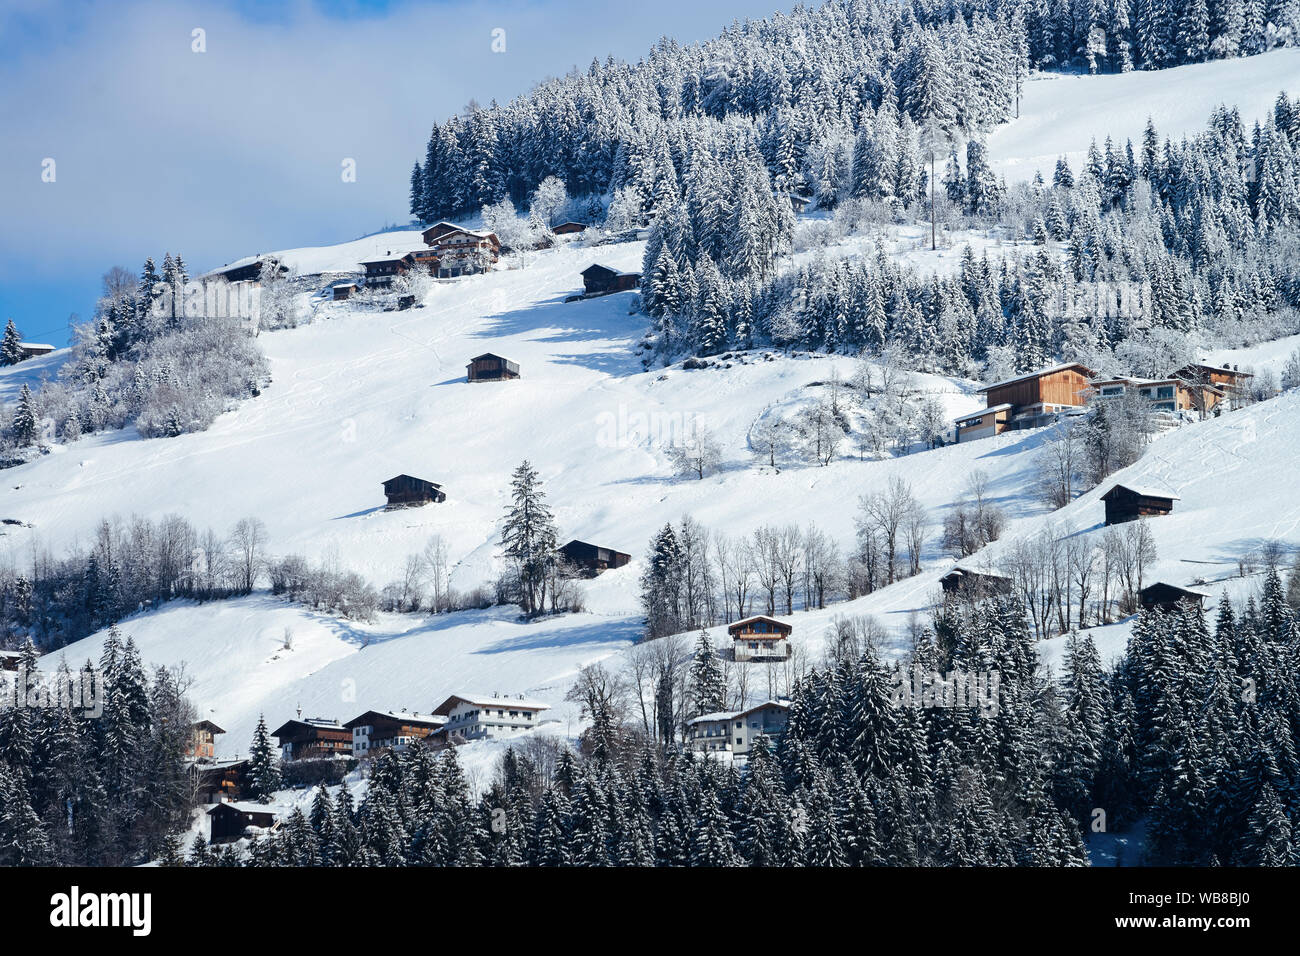 Scenery and snowy winter landscape of Apls at Mayrhofen in Zillertal valley near Innsbruck in Austria. Cottage houses and Forest with snow view at Alp Stock Photo